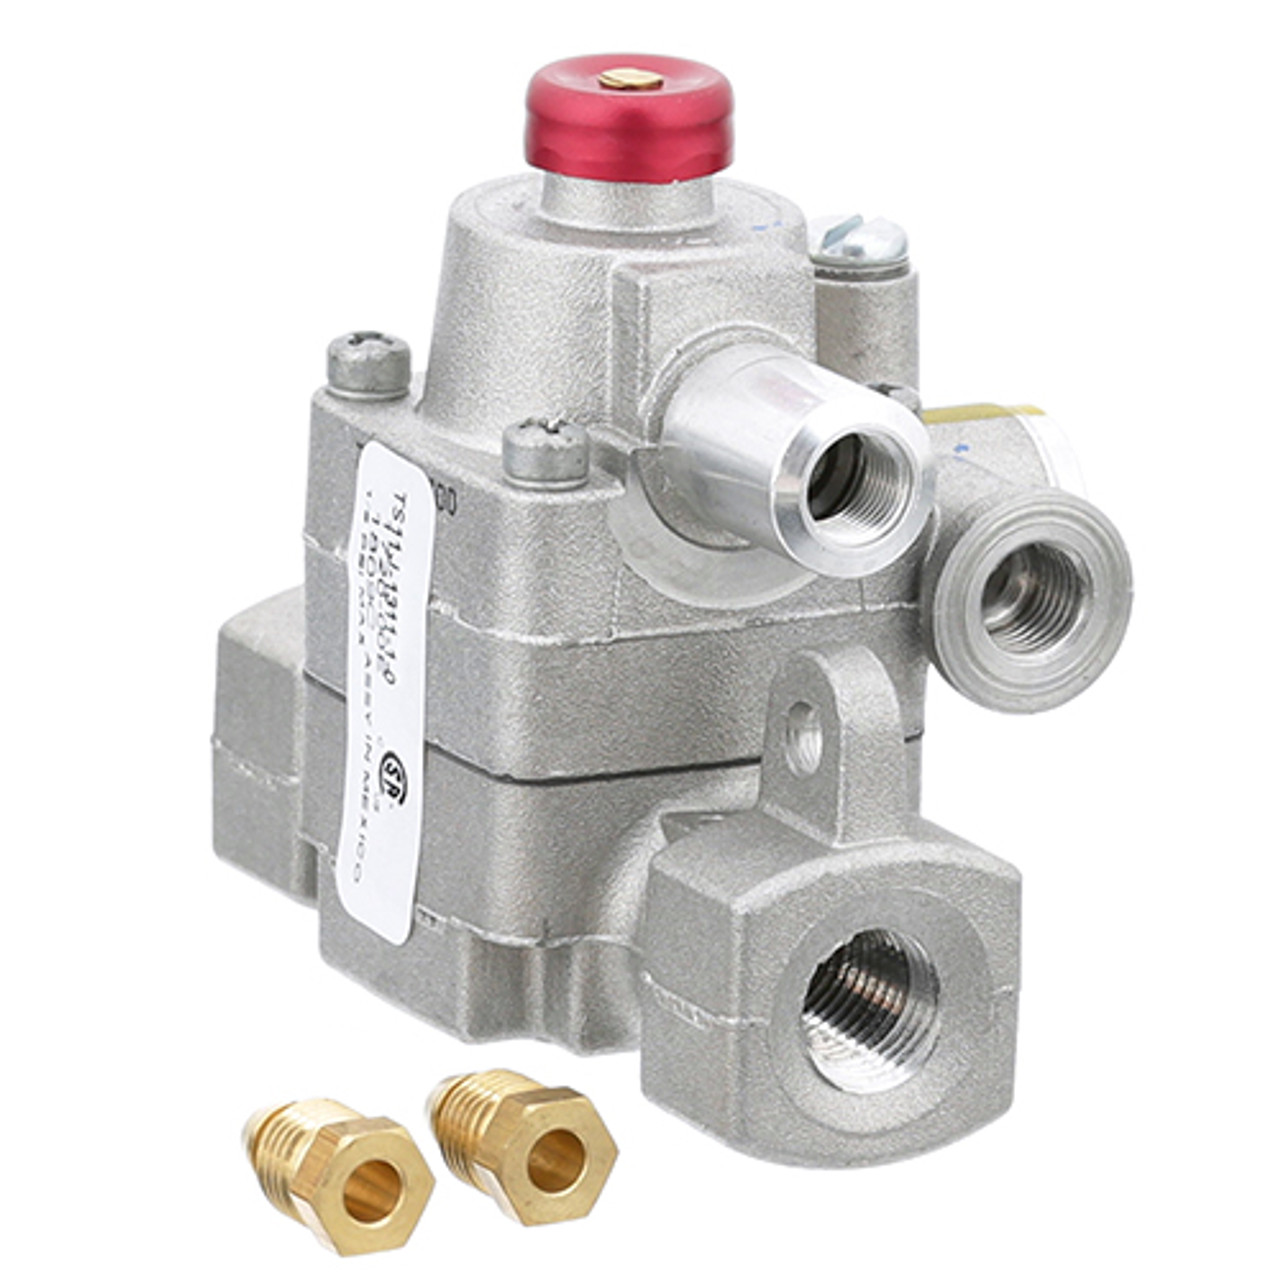 Safety Valve - Replacement Part For Randell GT-22